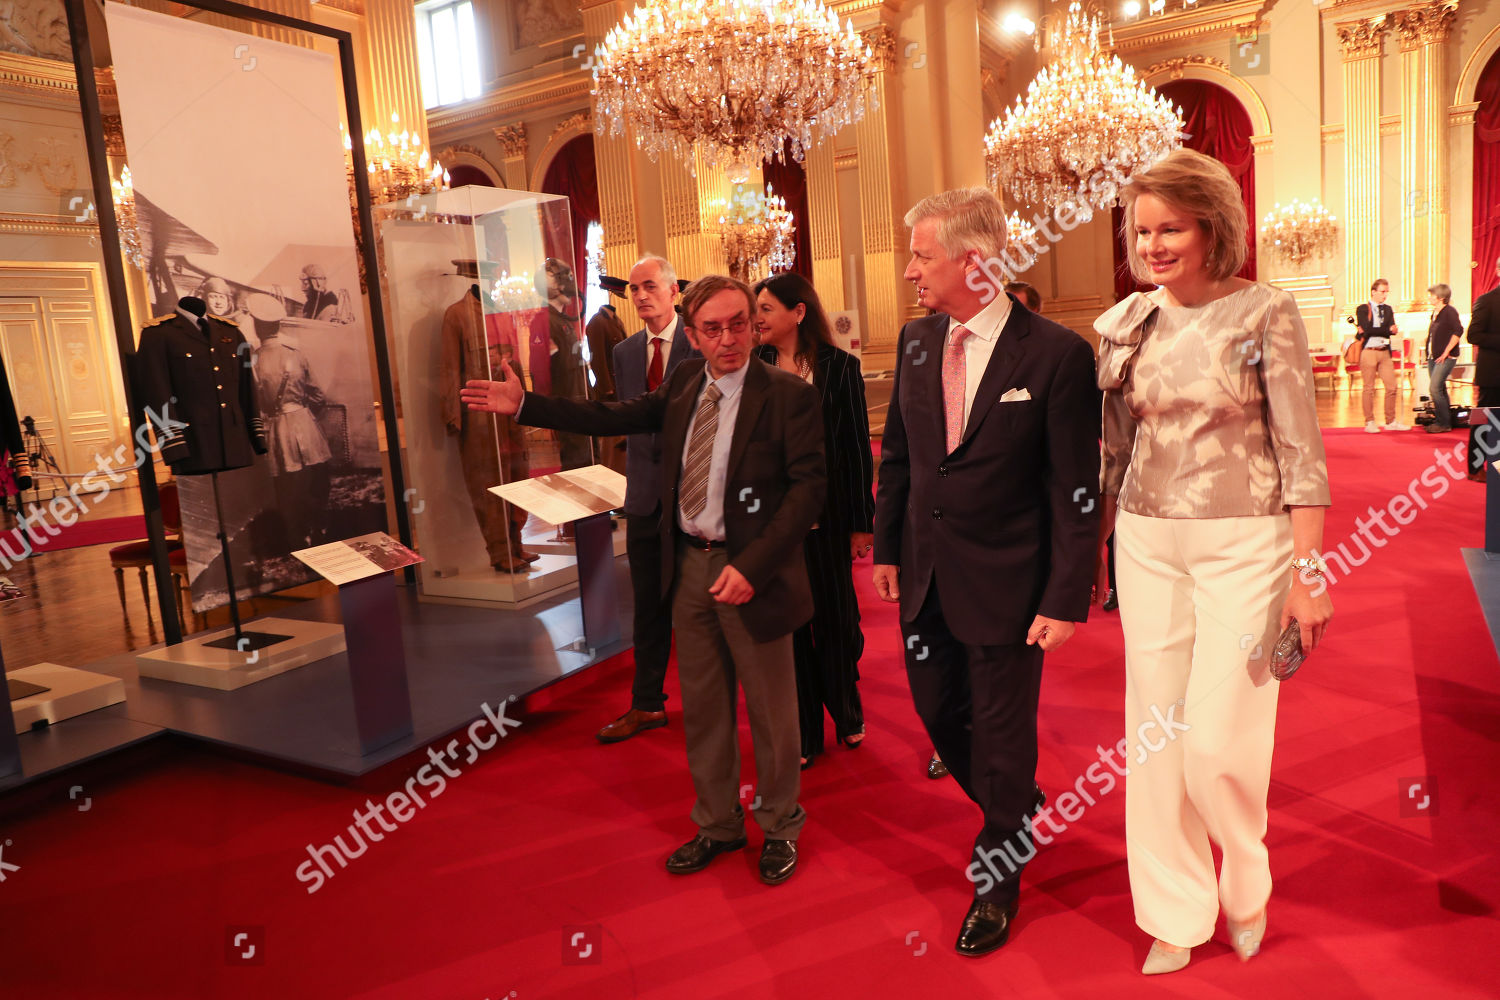 belgian-royals-summer-expo-at-the-royal-palace-brussels-belgium-shutterstock-editorial-10340779h.jpg